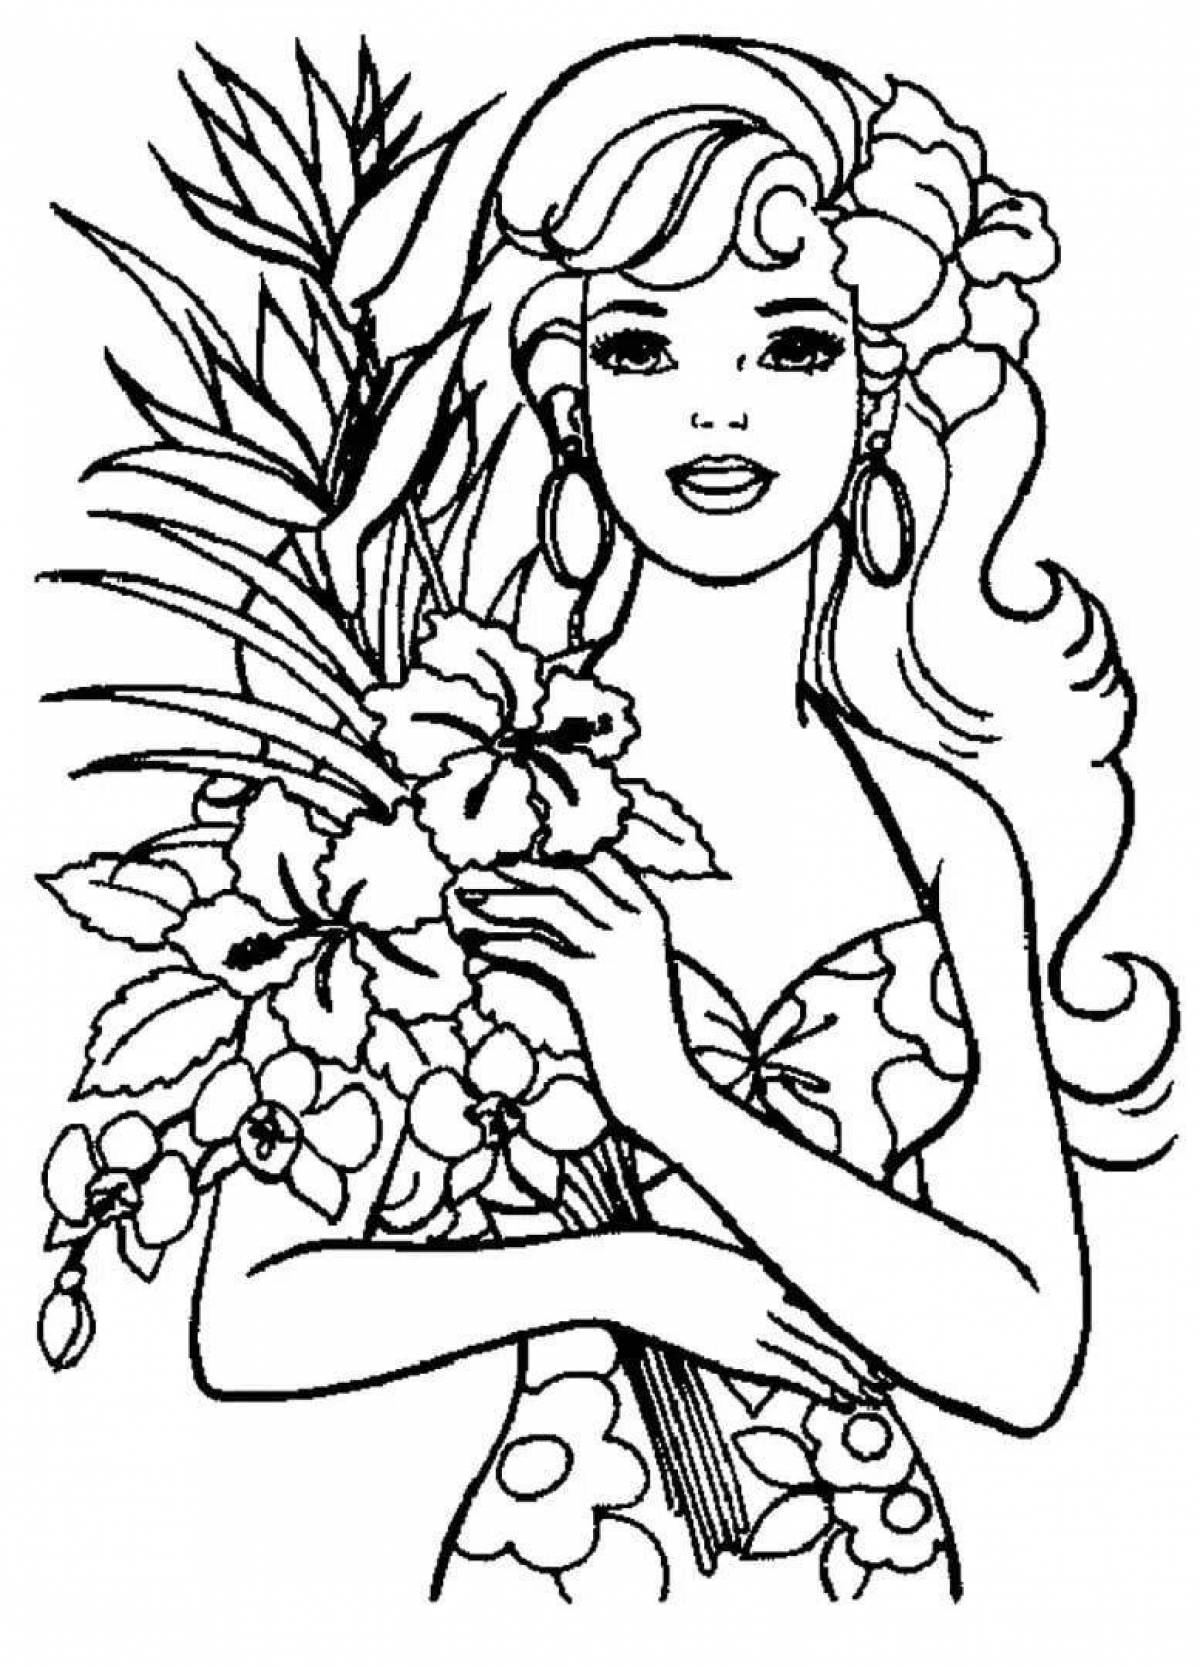 Amazing coloring pages women are beautiful